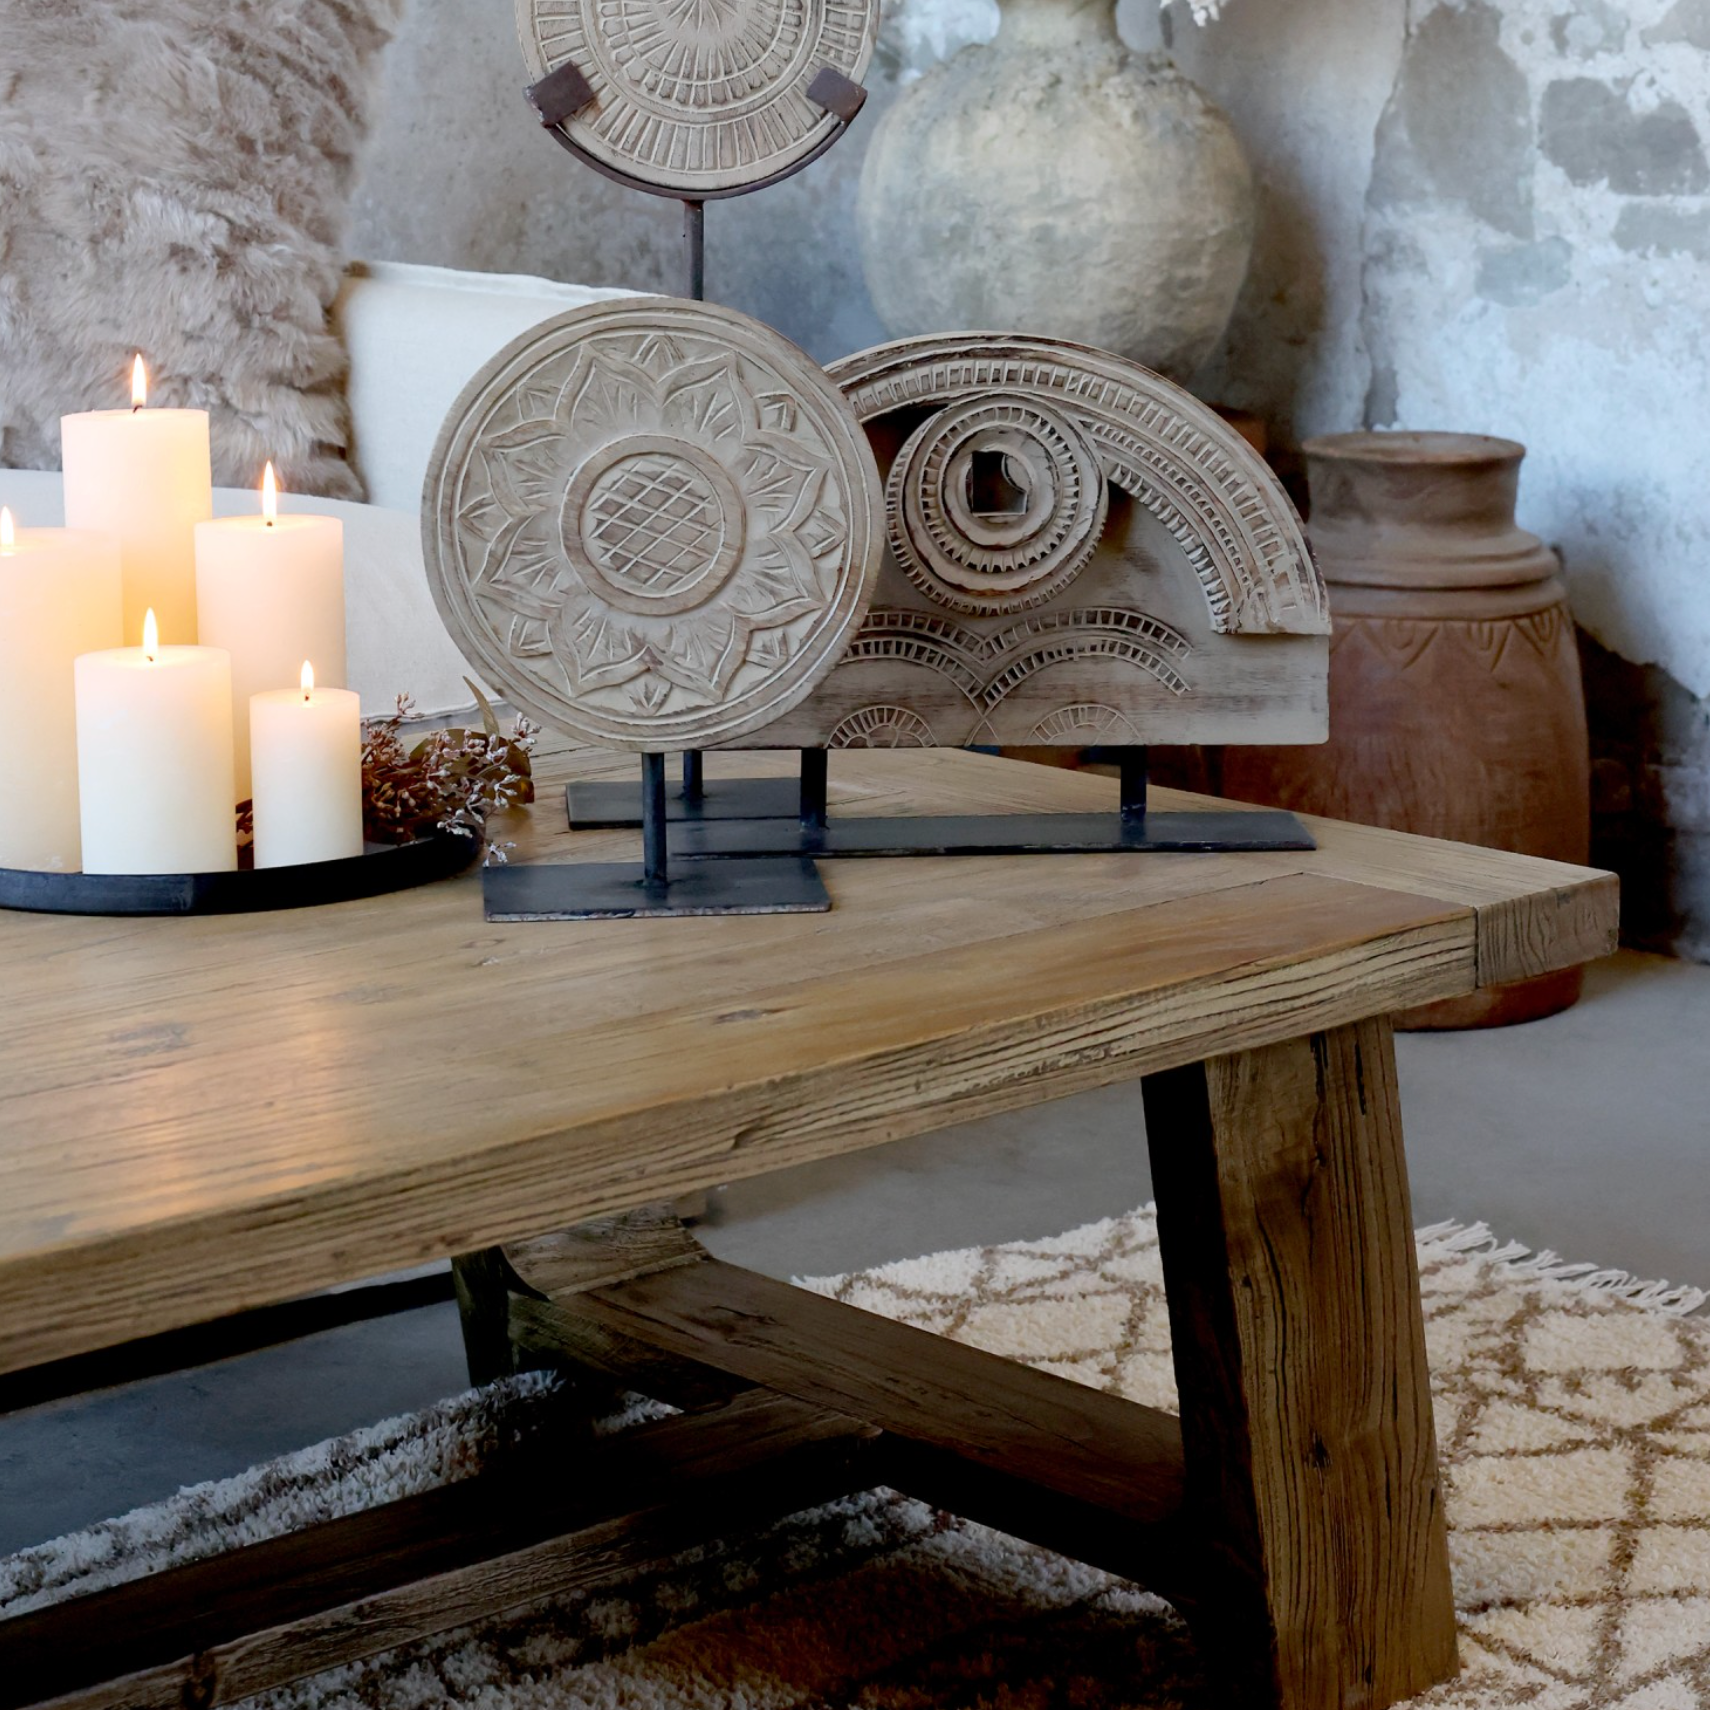 rustic wooden coffee table with decor items and candles.